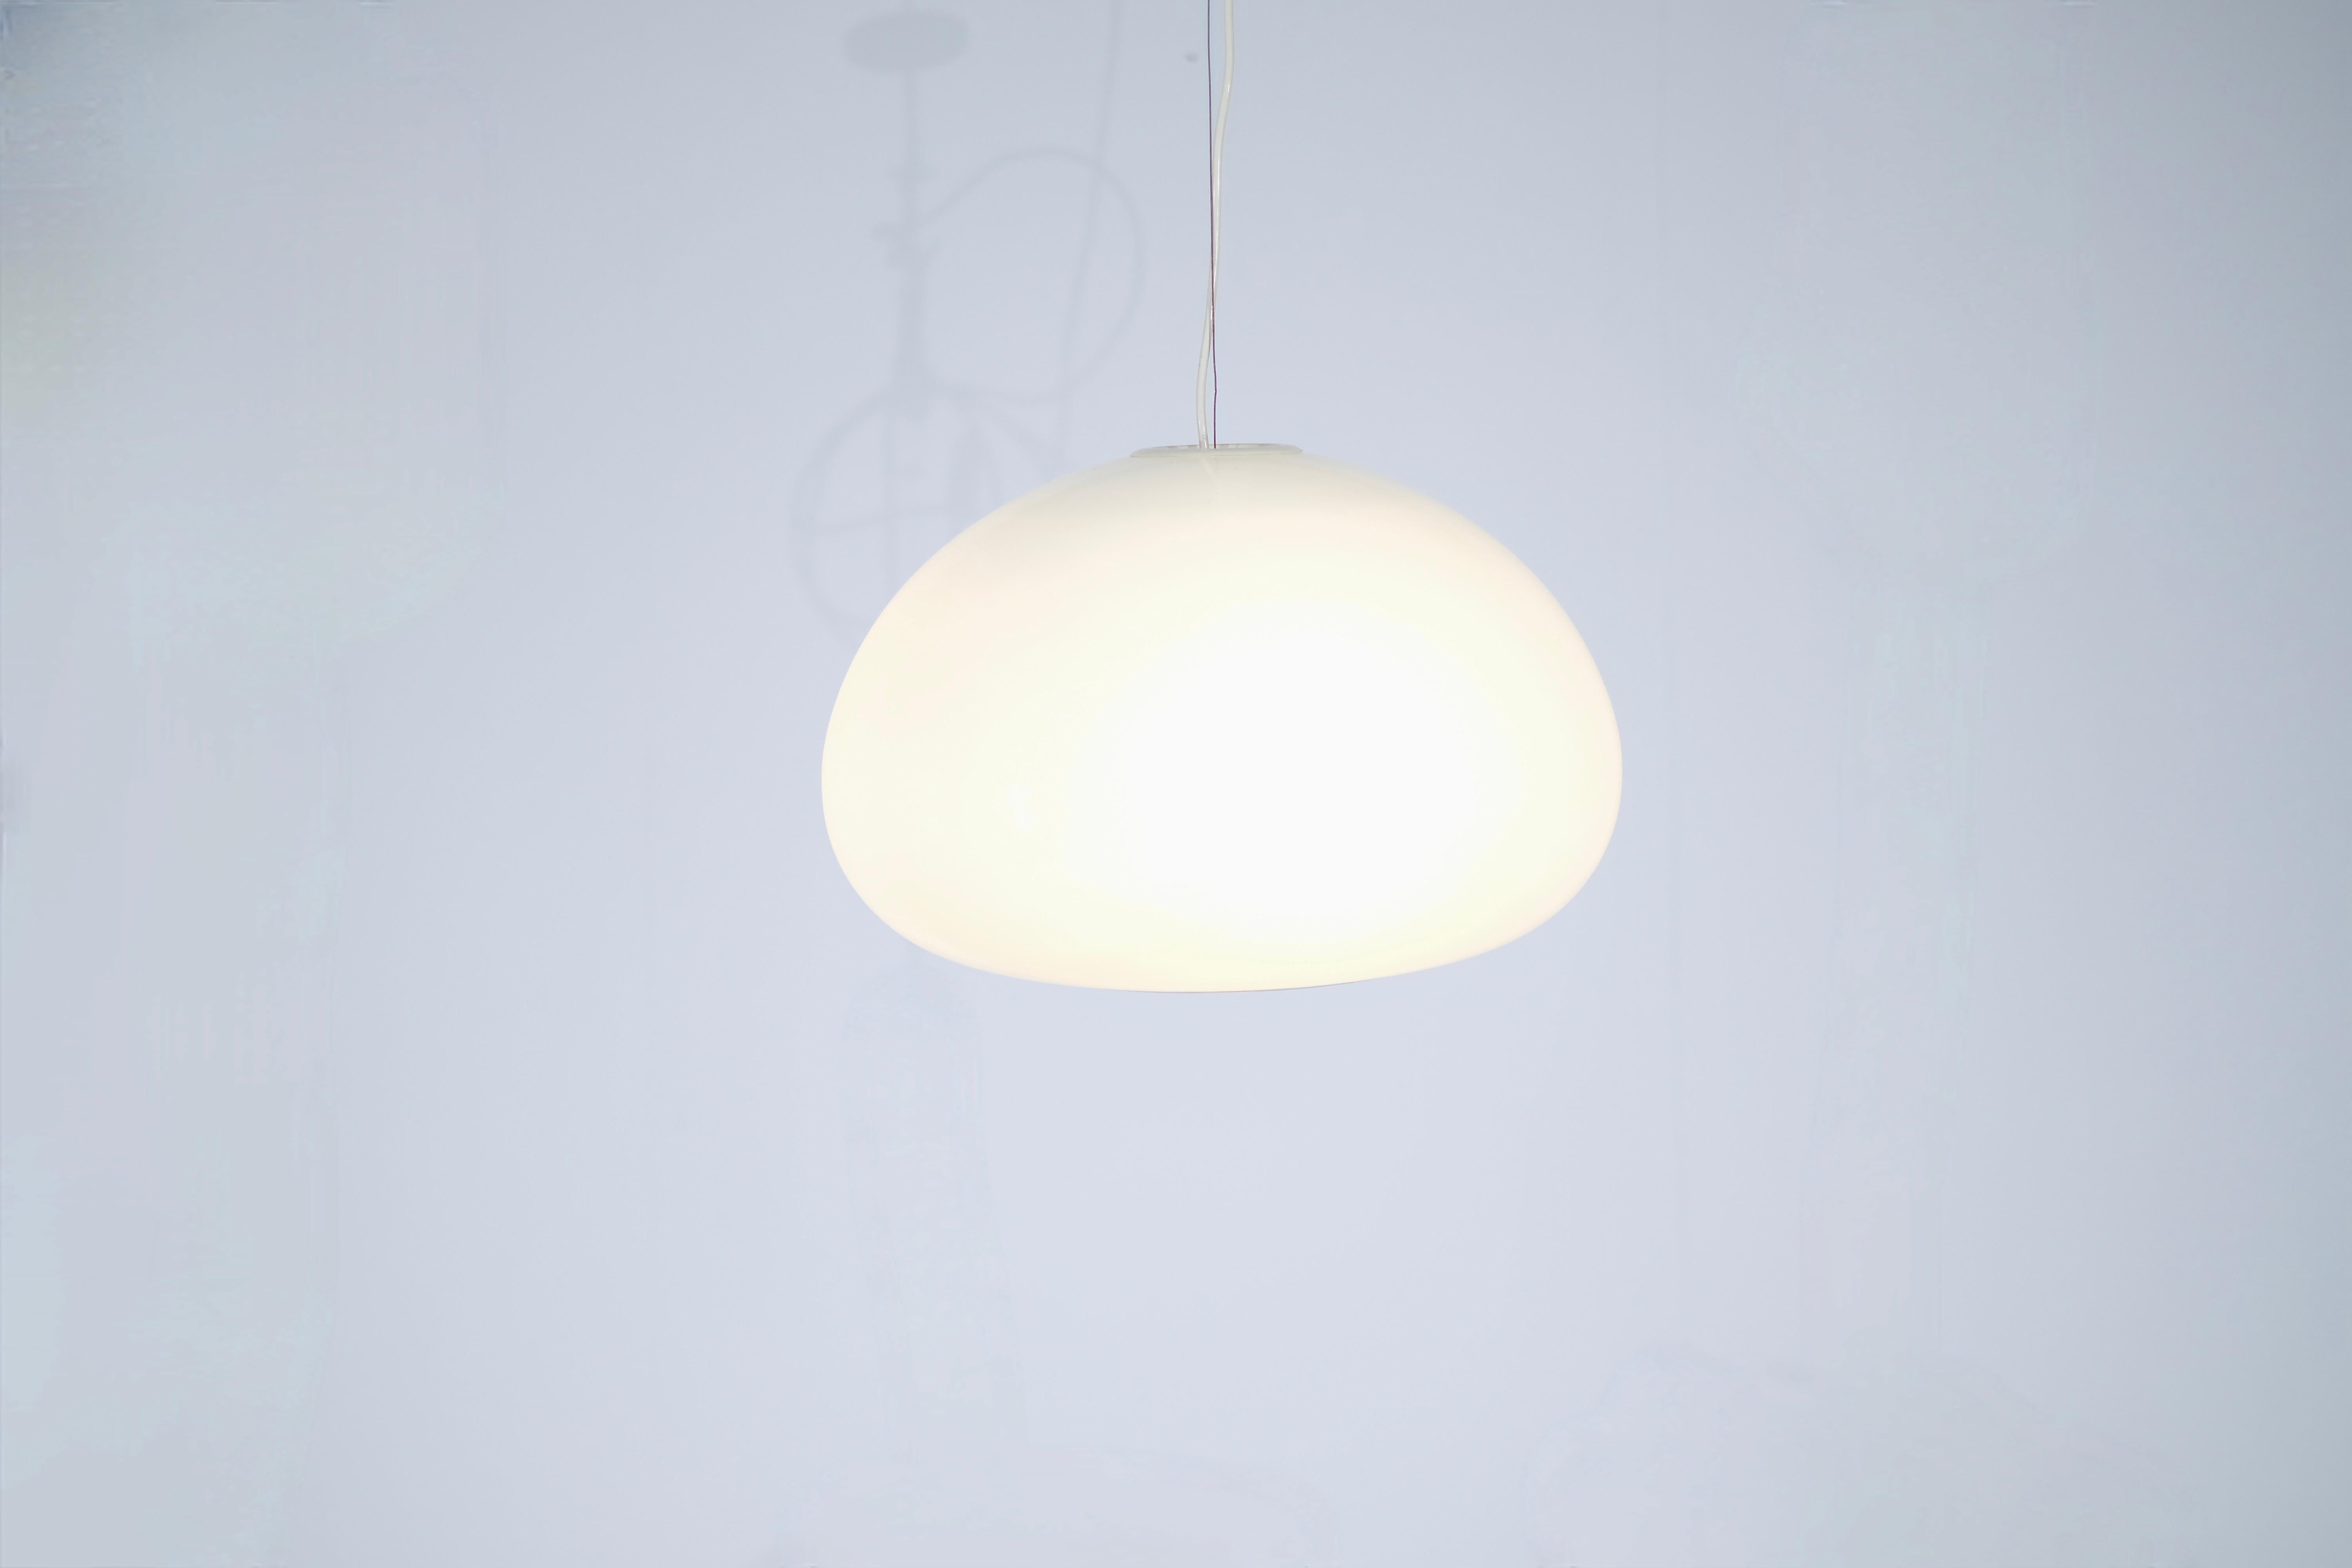 Magnificent pendant light named 